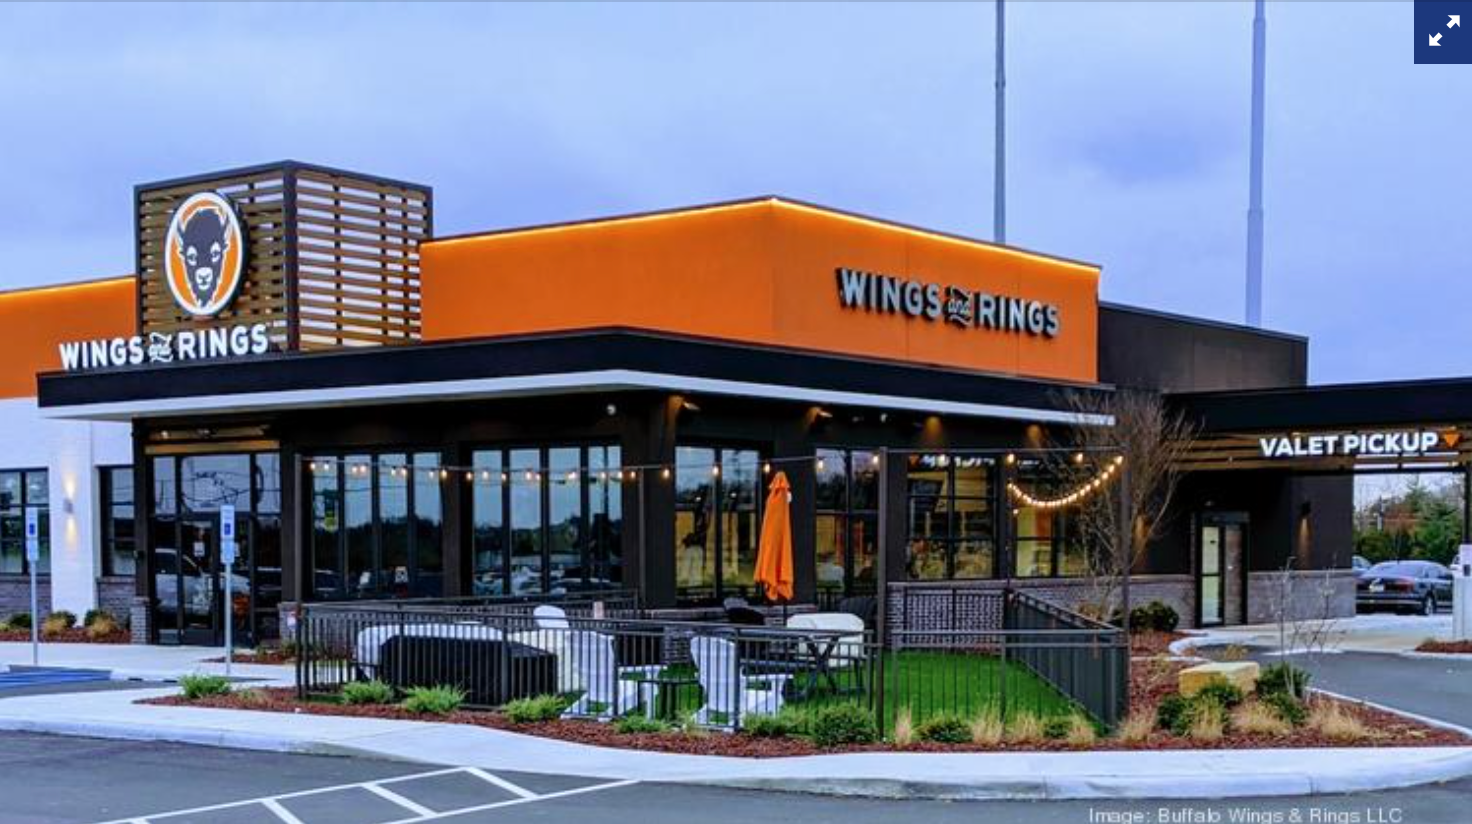 timmerman flauw Pracht Buffalo Wings & Rings planning push into Cleveland area - cleveland.com